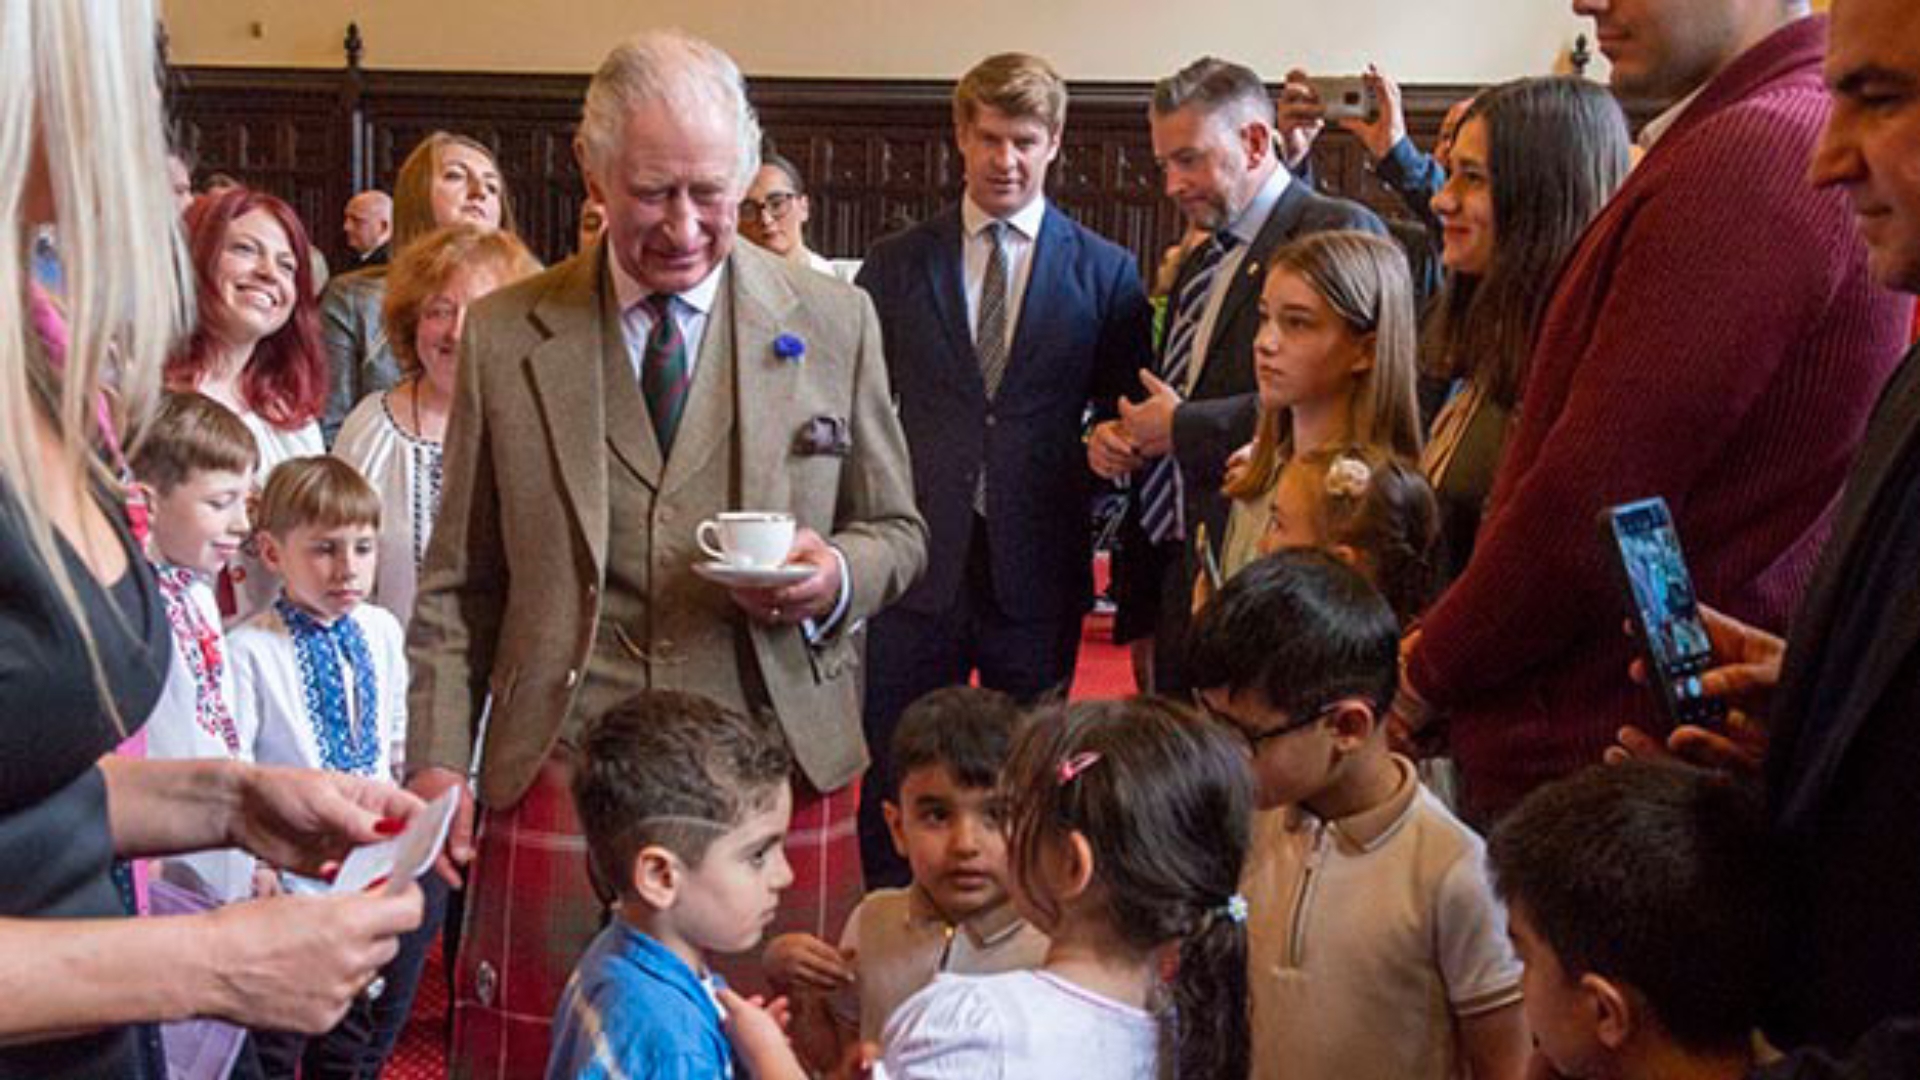 King Charles III on a visit to Aberdeen to meet families forced to flee their country because of conflict – and to thank the city for providing a place of refuge and humanitarian aid.